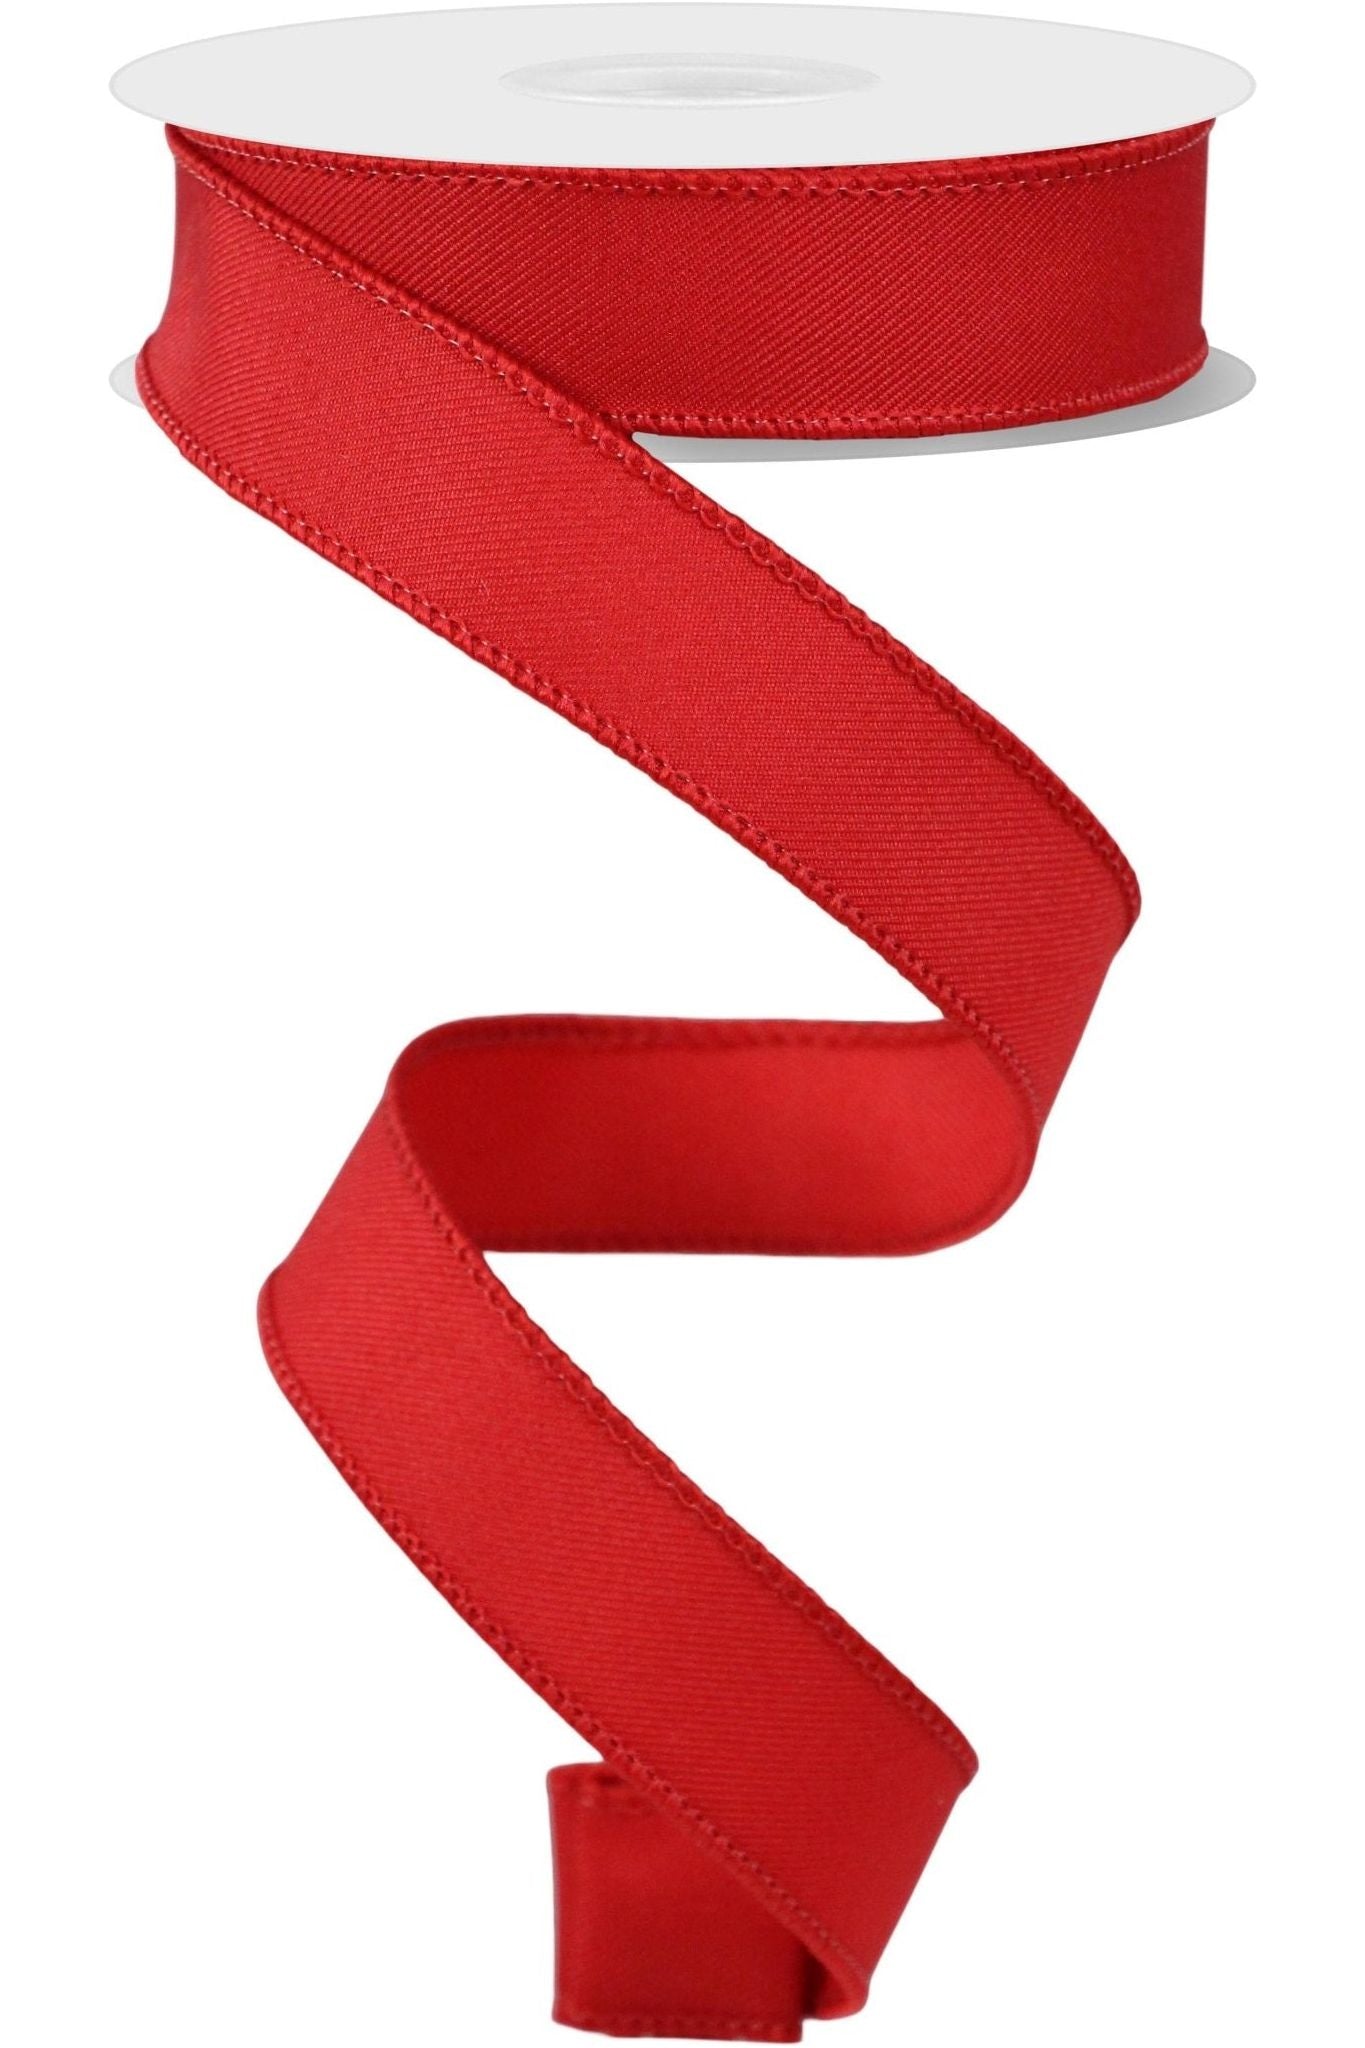 Shop For 7/8" Diagonal Weave Ribbon: Red (10 Yards) RGE720224